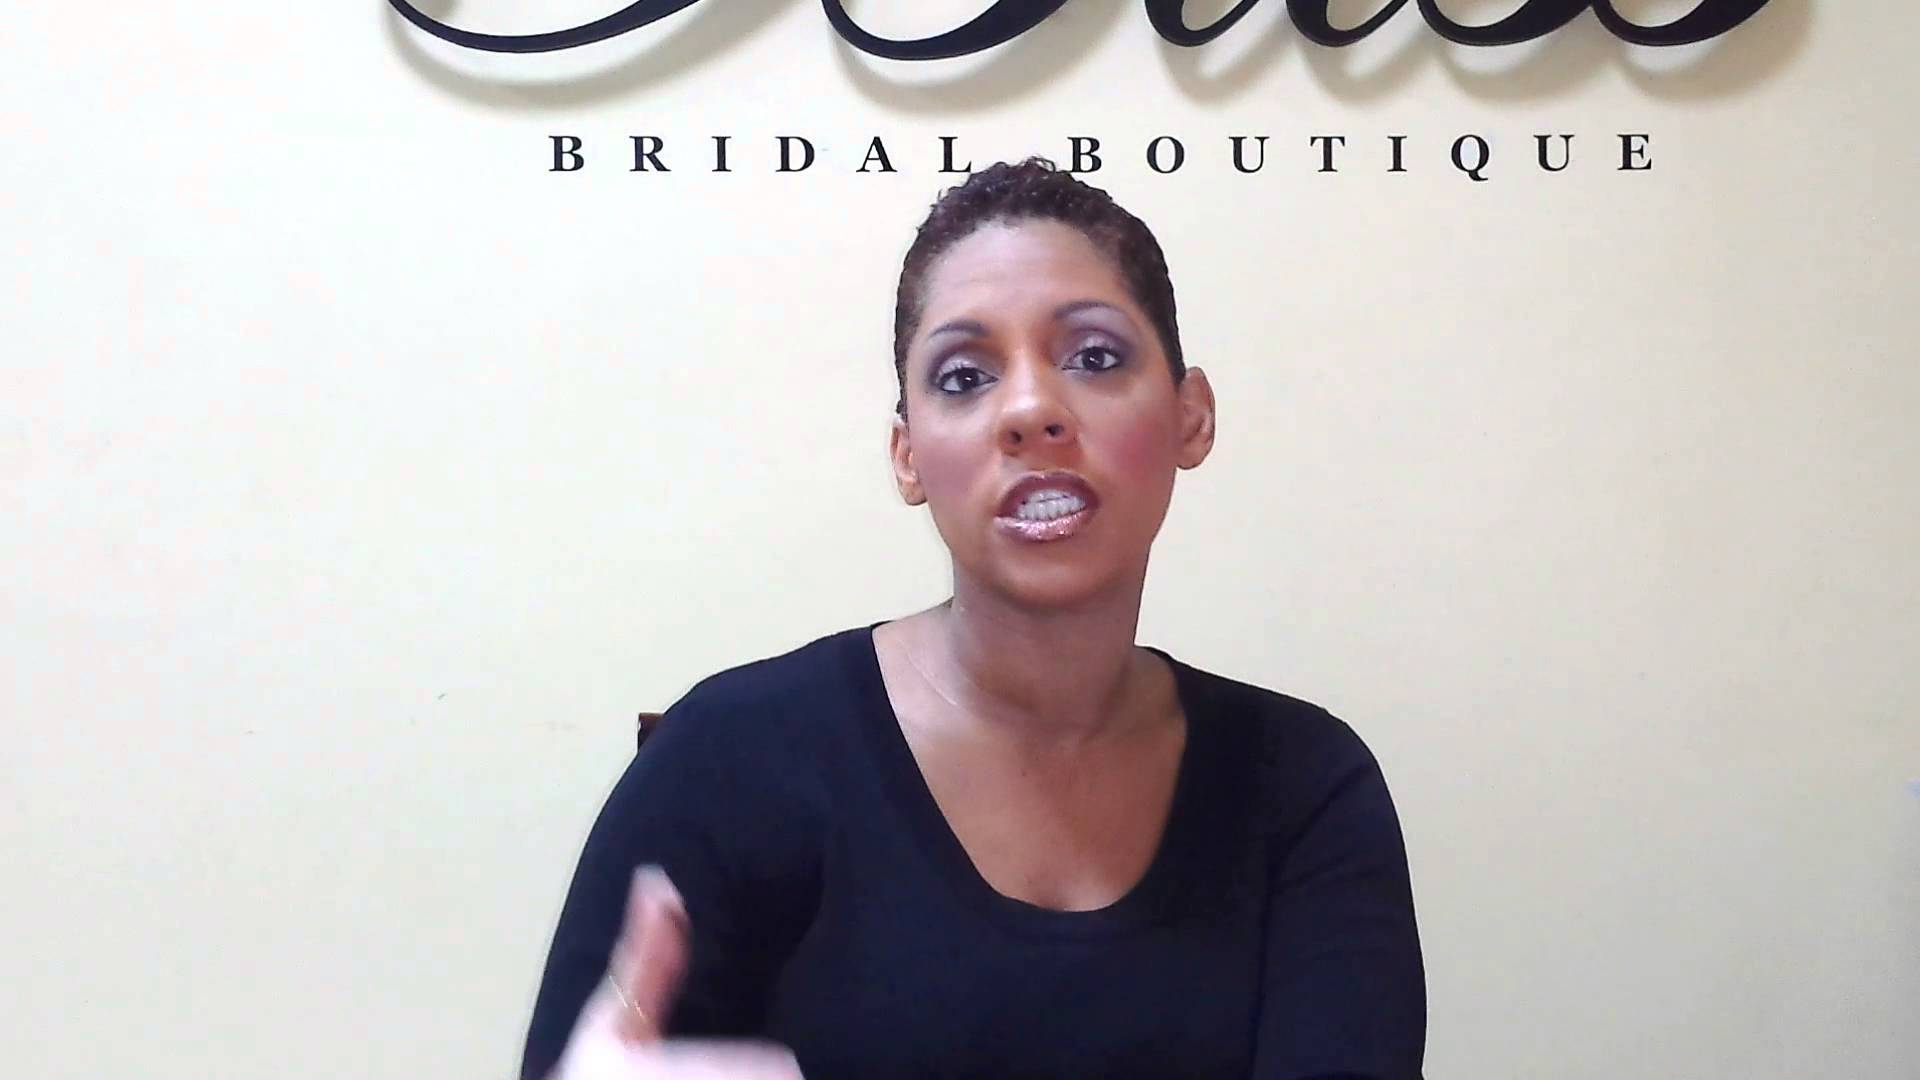 Bliss Bridal Tips # 19 – Buying your wedding dress online or overseas